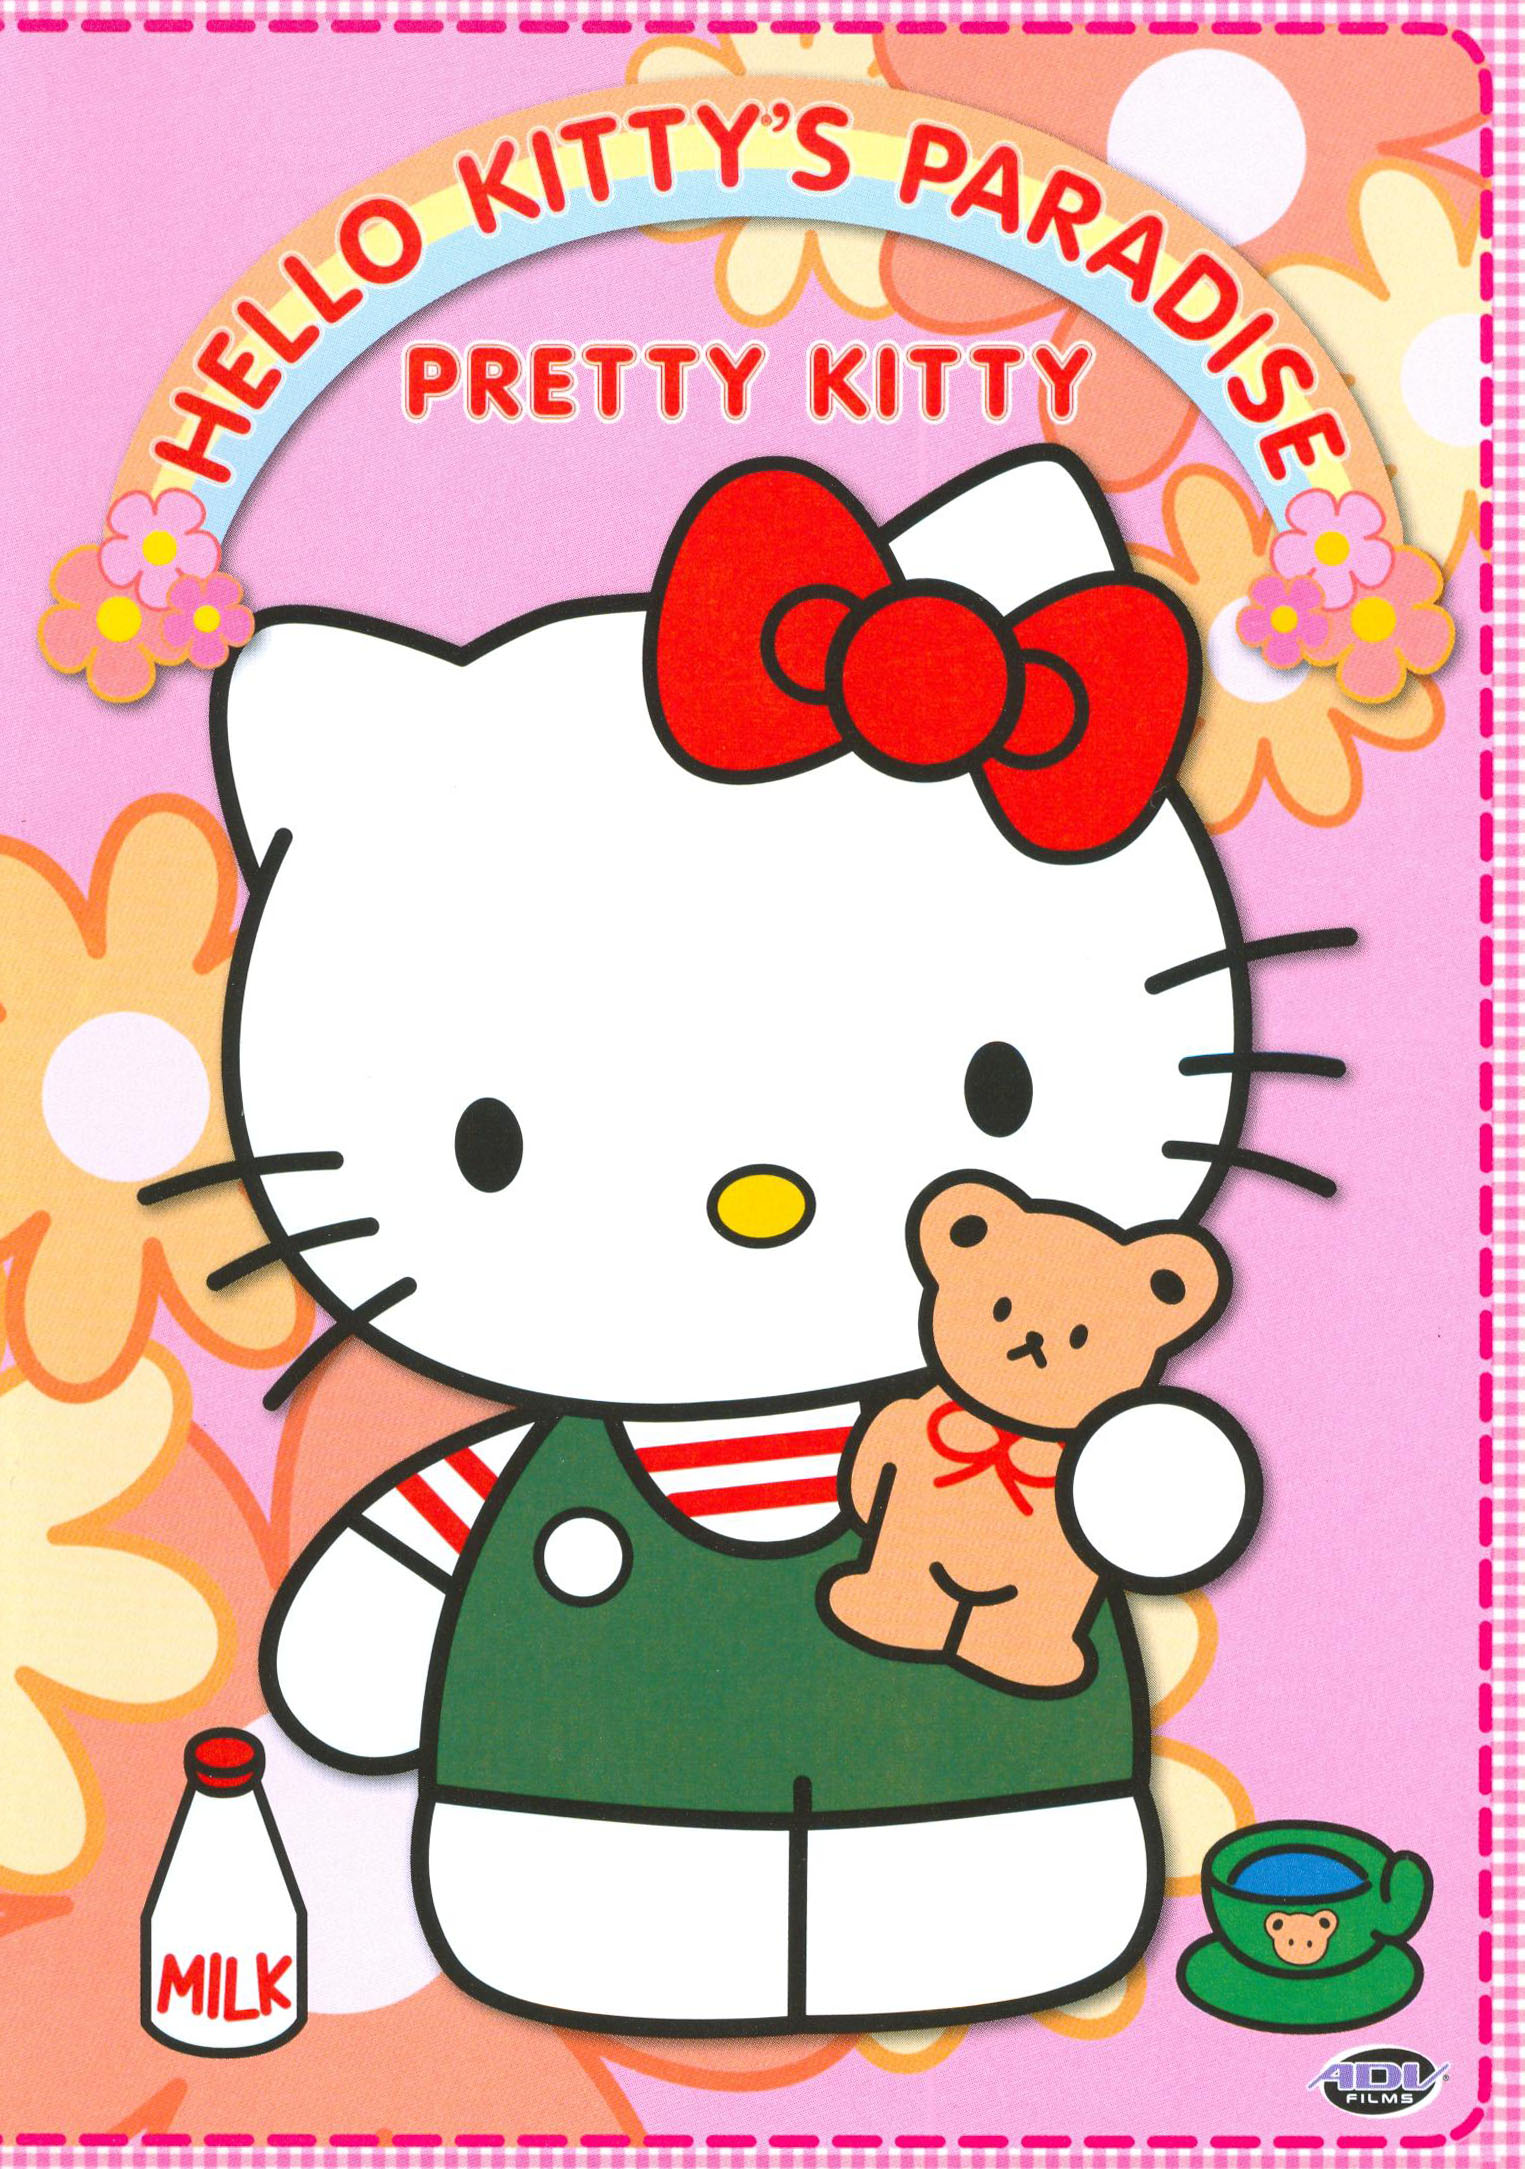 best-buy-hello-kitty-s-paradise-pretty-kitty-fun-with-friends-2